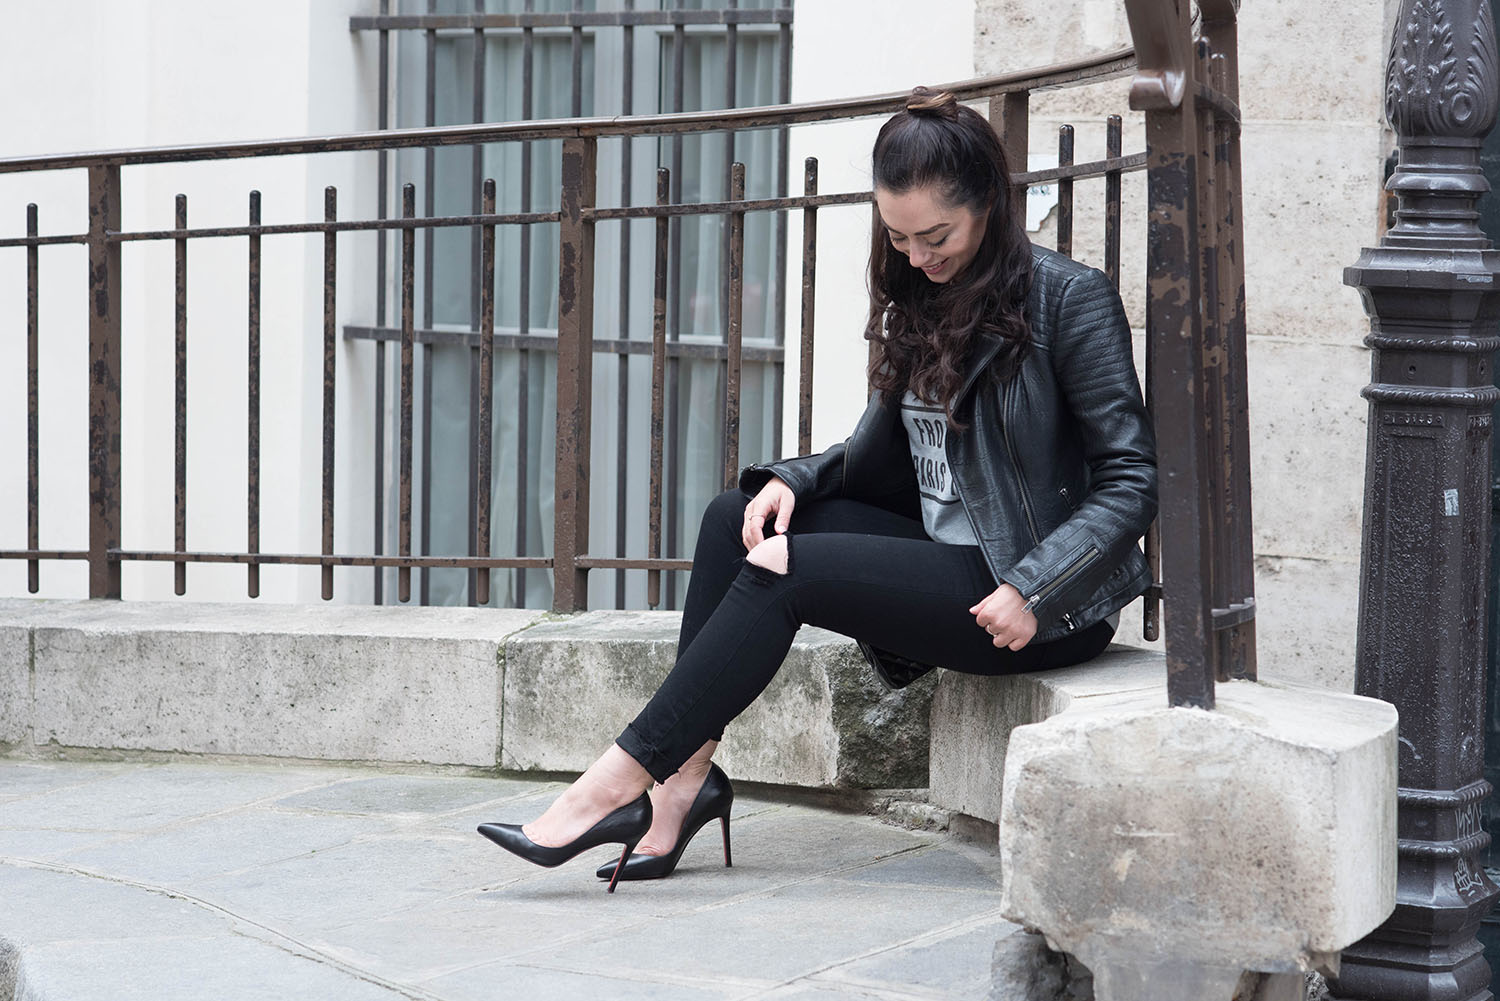 Winnipeg fashion blogger Cee Fardoe of Coco & Vera sits outside the Palais Royal in Paris wearing a Cupcakes & Cashmere leather jacket and Christian Louboutin Pigalle pumps